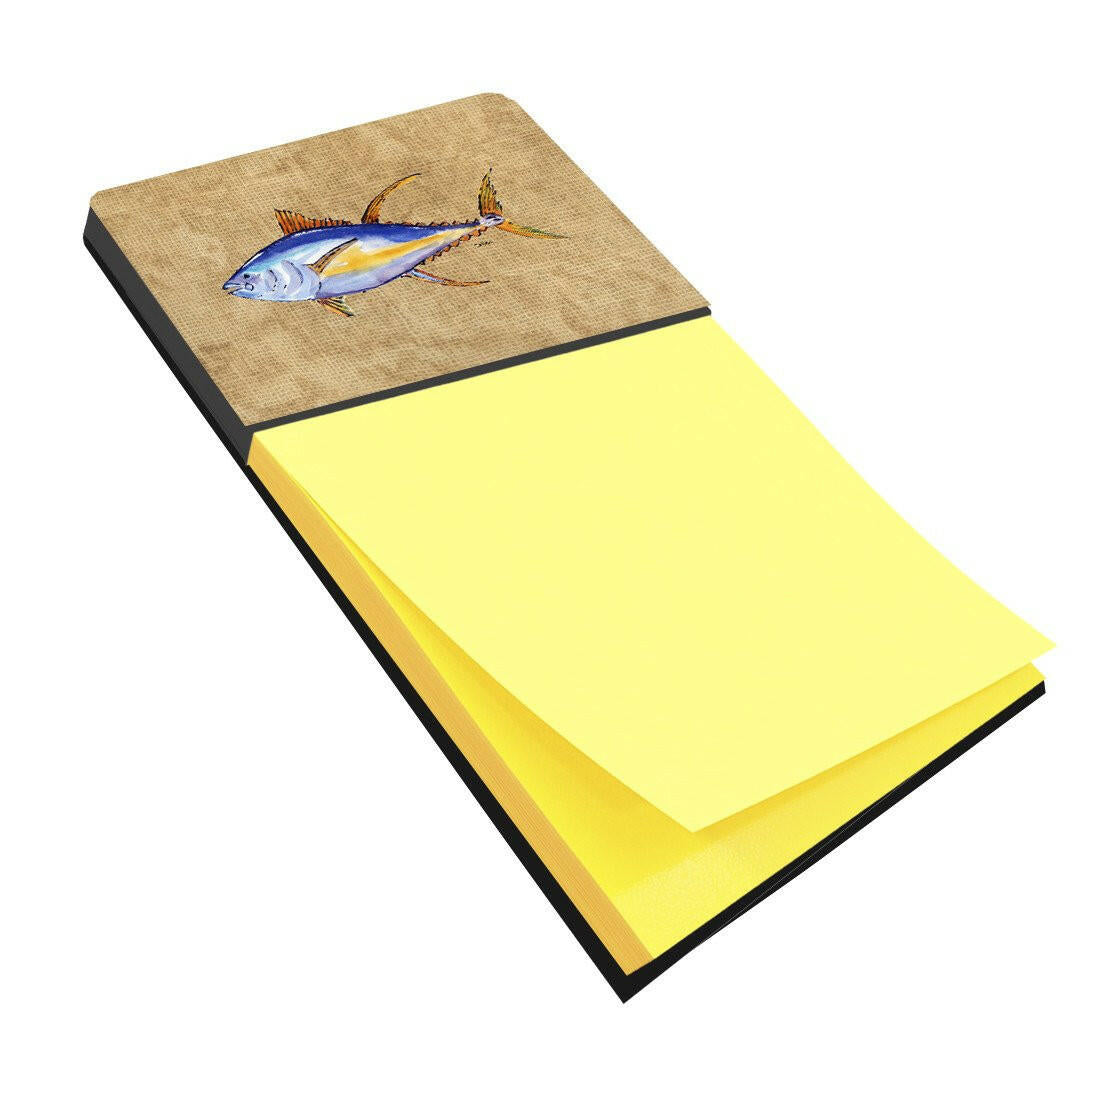 Tuna Fish Refiillable Sticky Note Holder or Postit Note Dispenser 8817SN by Caroline's Treasures